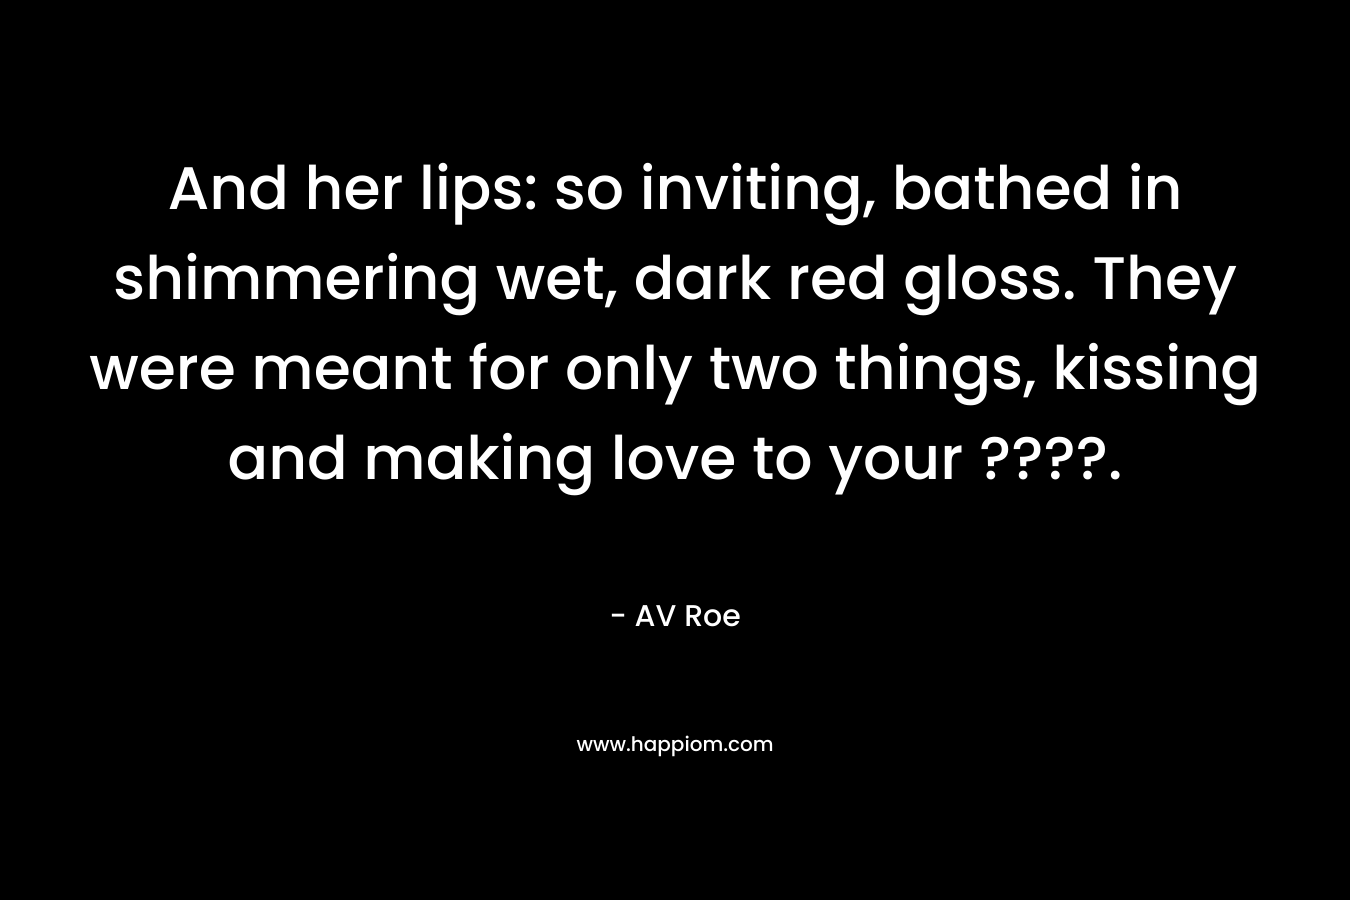 And her lips: so inviting, bathed in shimmering wet, dark red gloss. They were meant for only two things, kissing and making love to your ????. – AV Roe